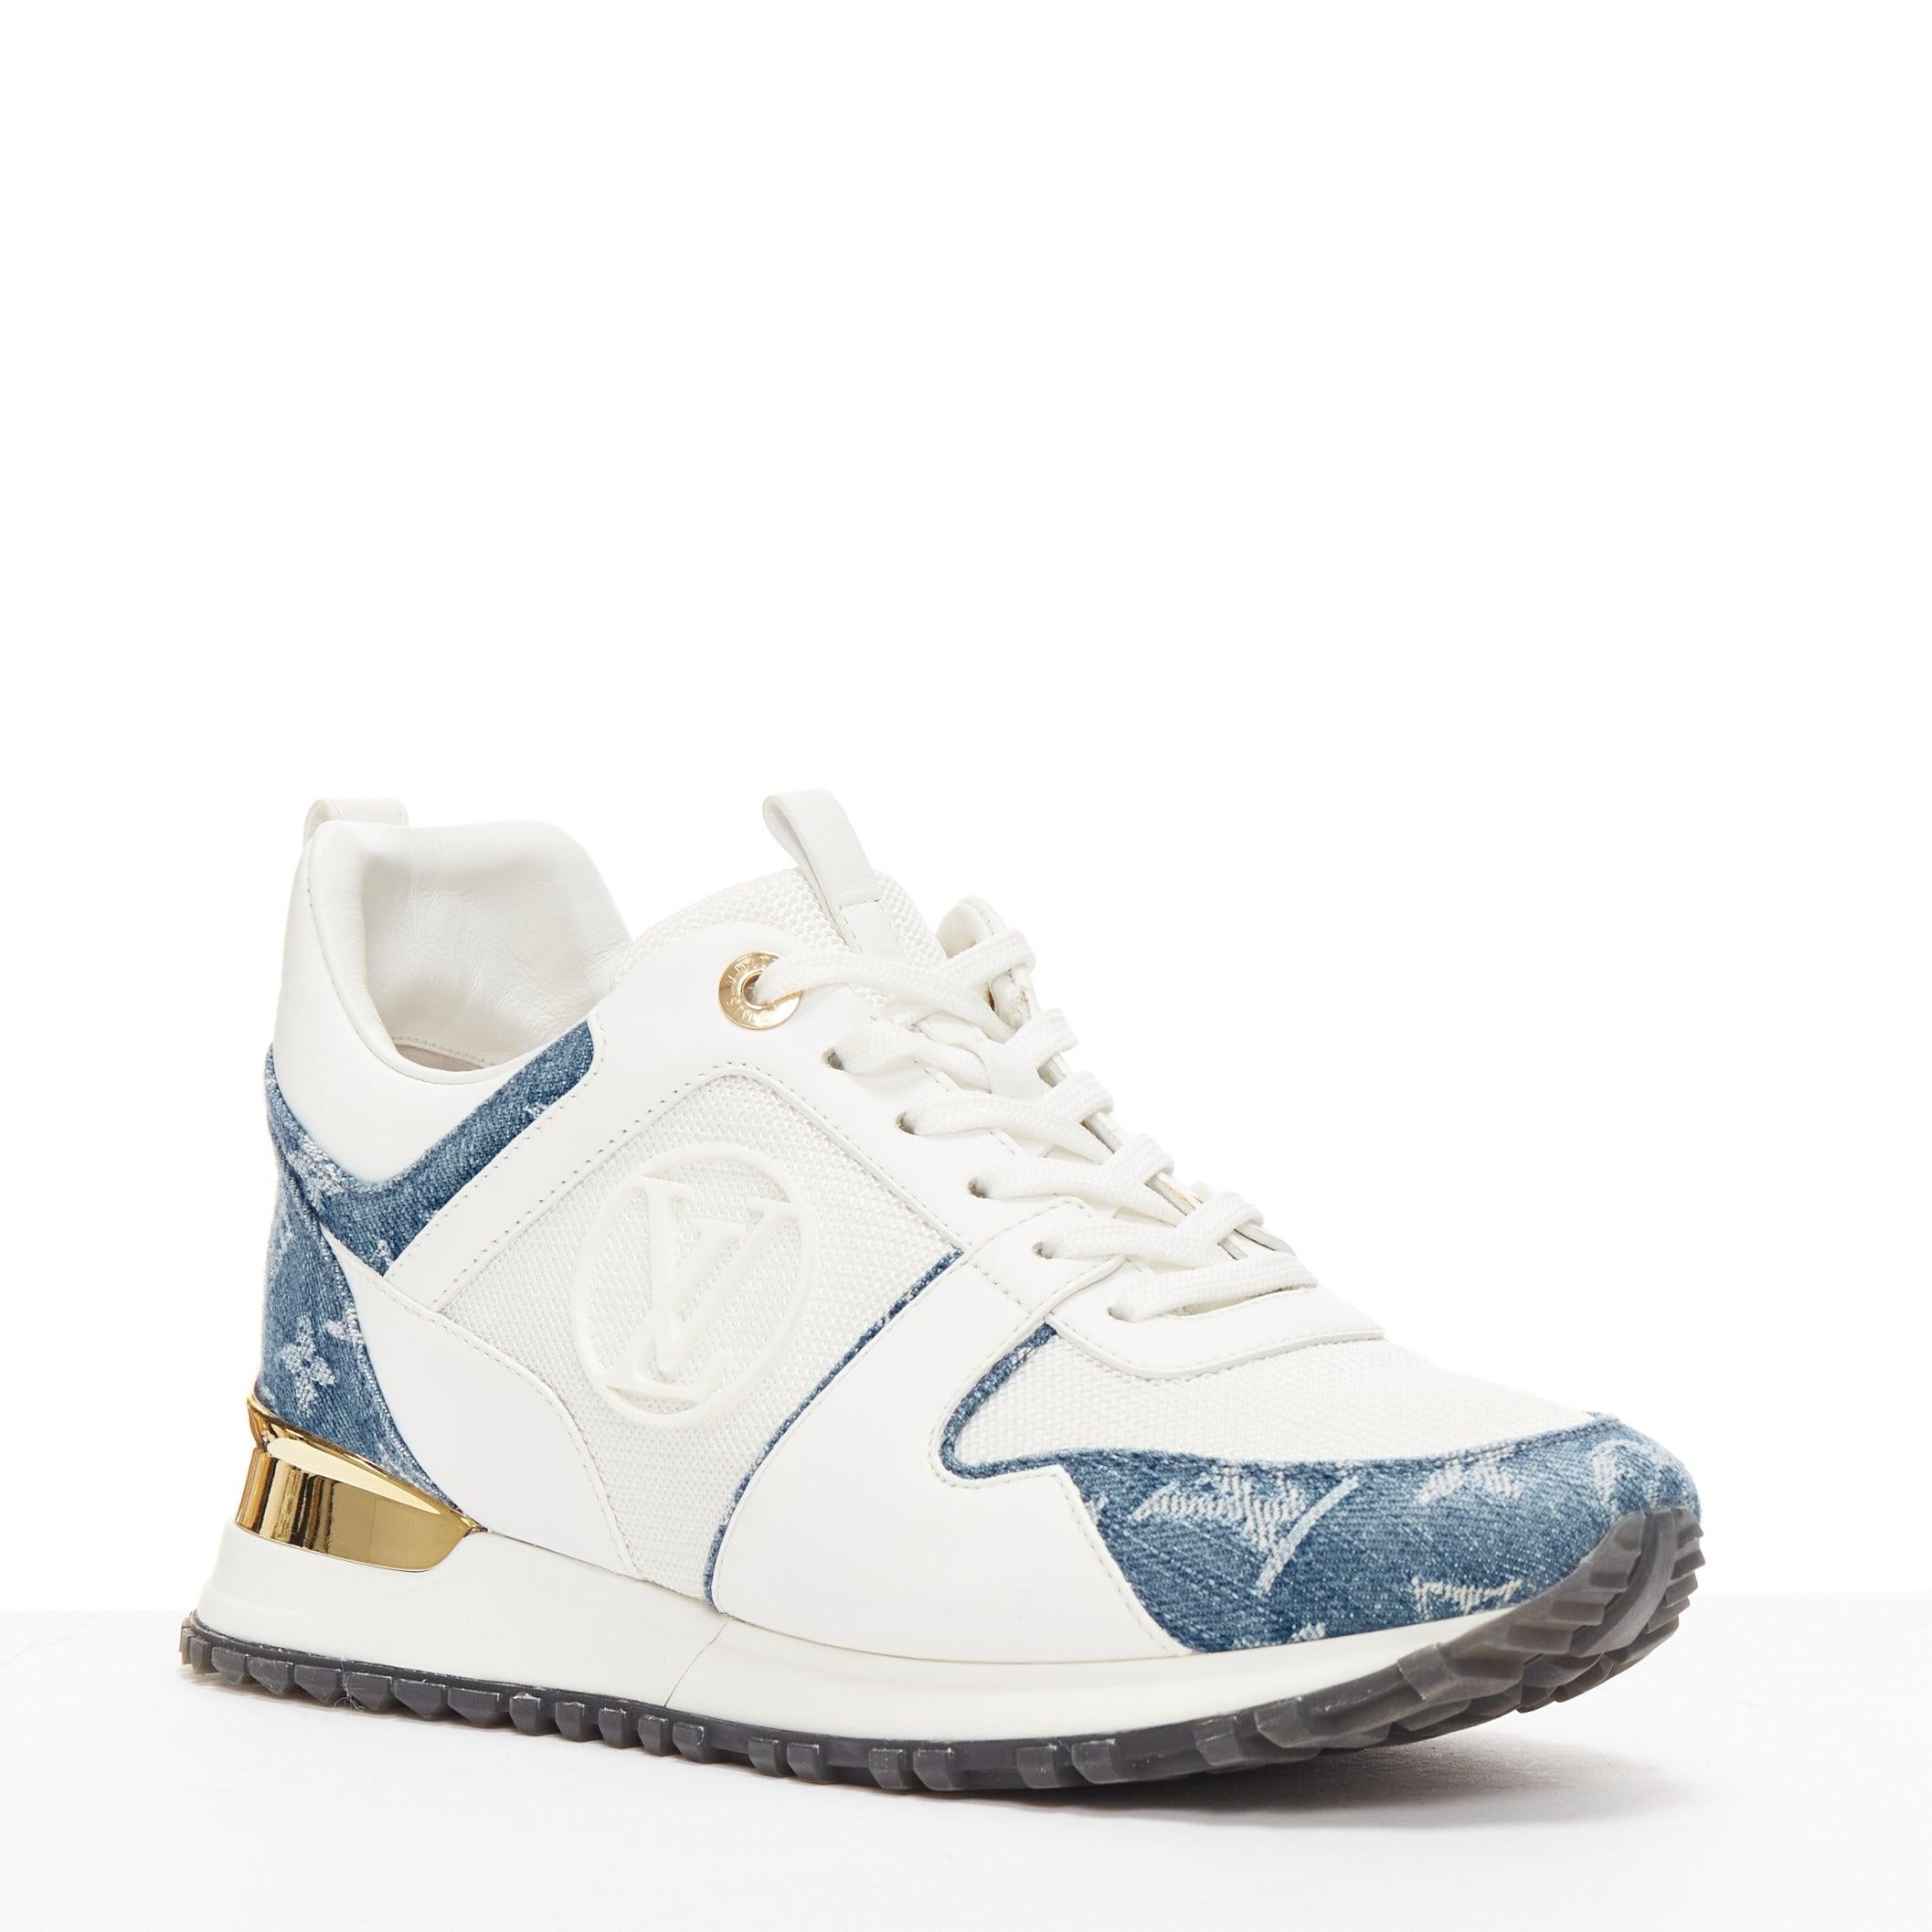 LOUIS VUITTON Run Away blue denim LV monogram white logo wedged sneakers EU37.5
Reference: AAWC/A01169
Brand: Louis Vuitton
Model: Run Away
Material: Leather, Mesh, Denim
Color: White, Blue
Pattern: Monogram
Closure: Lace Up
Lining: White